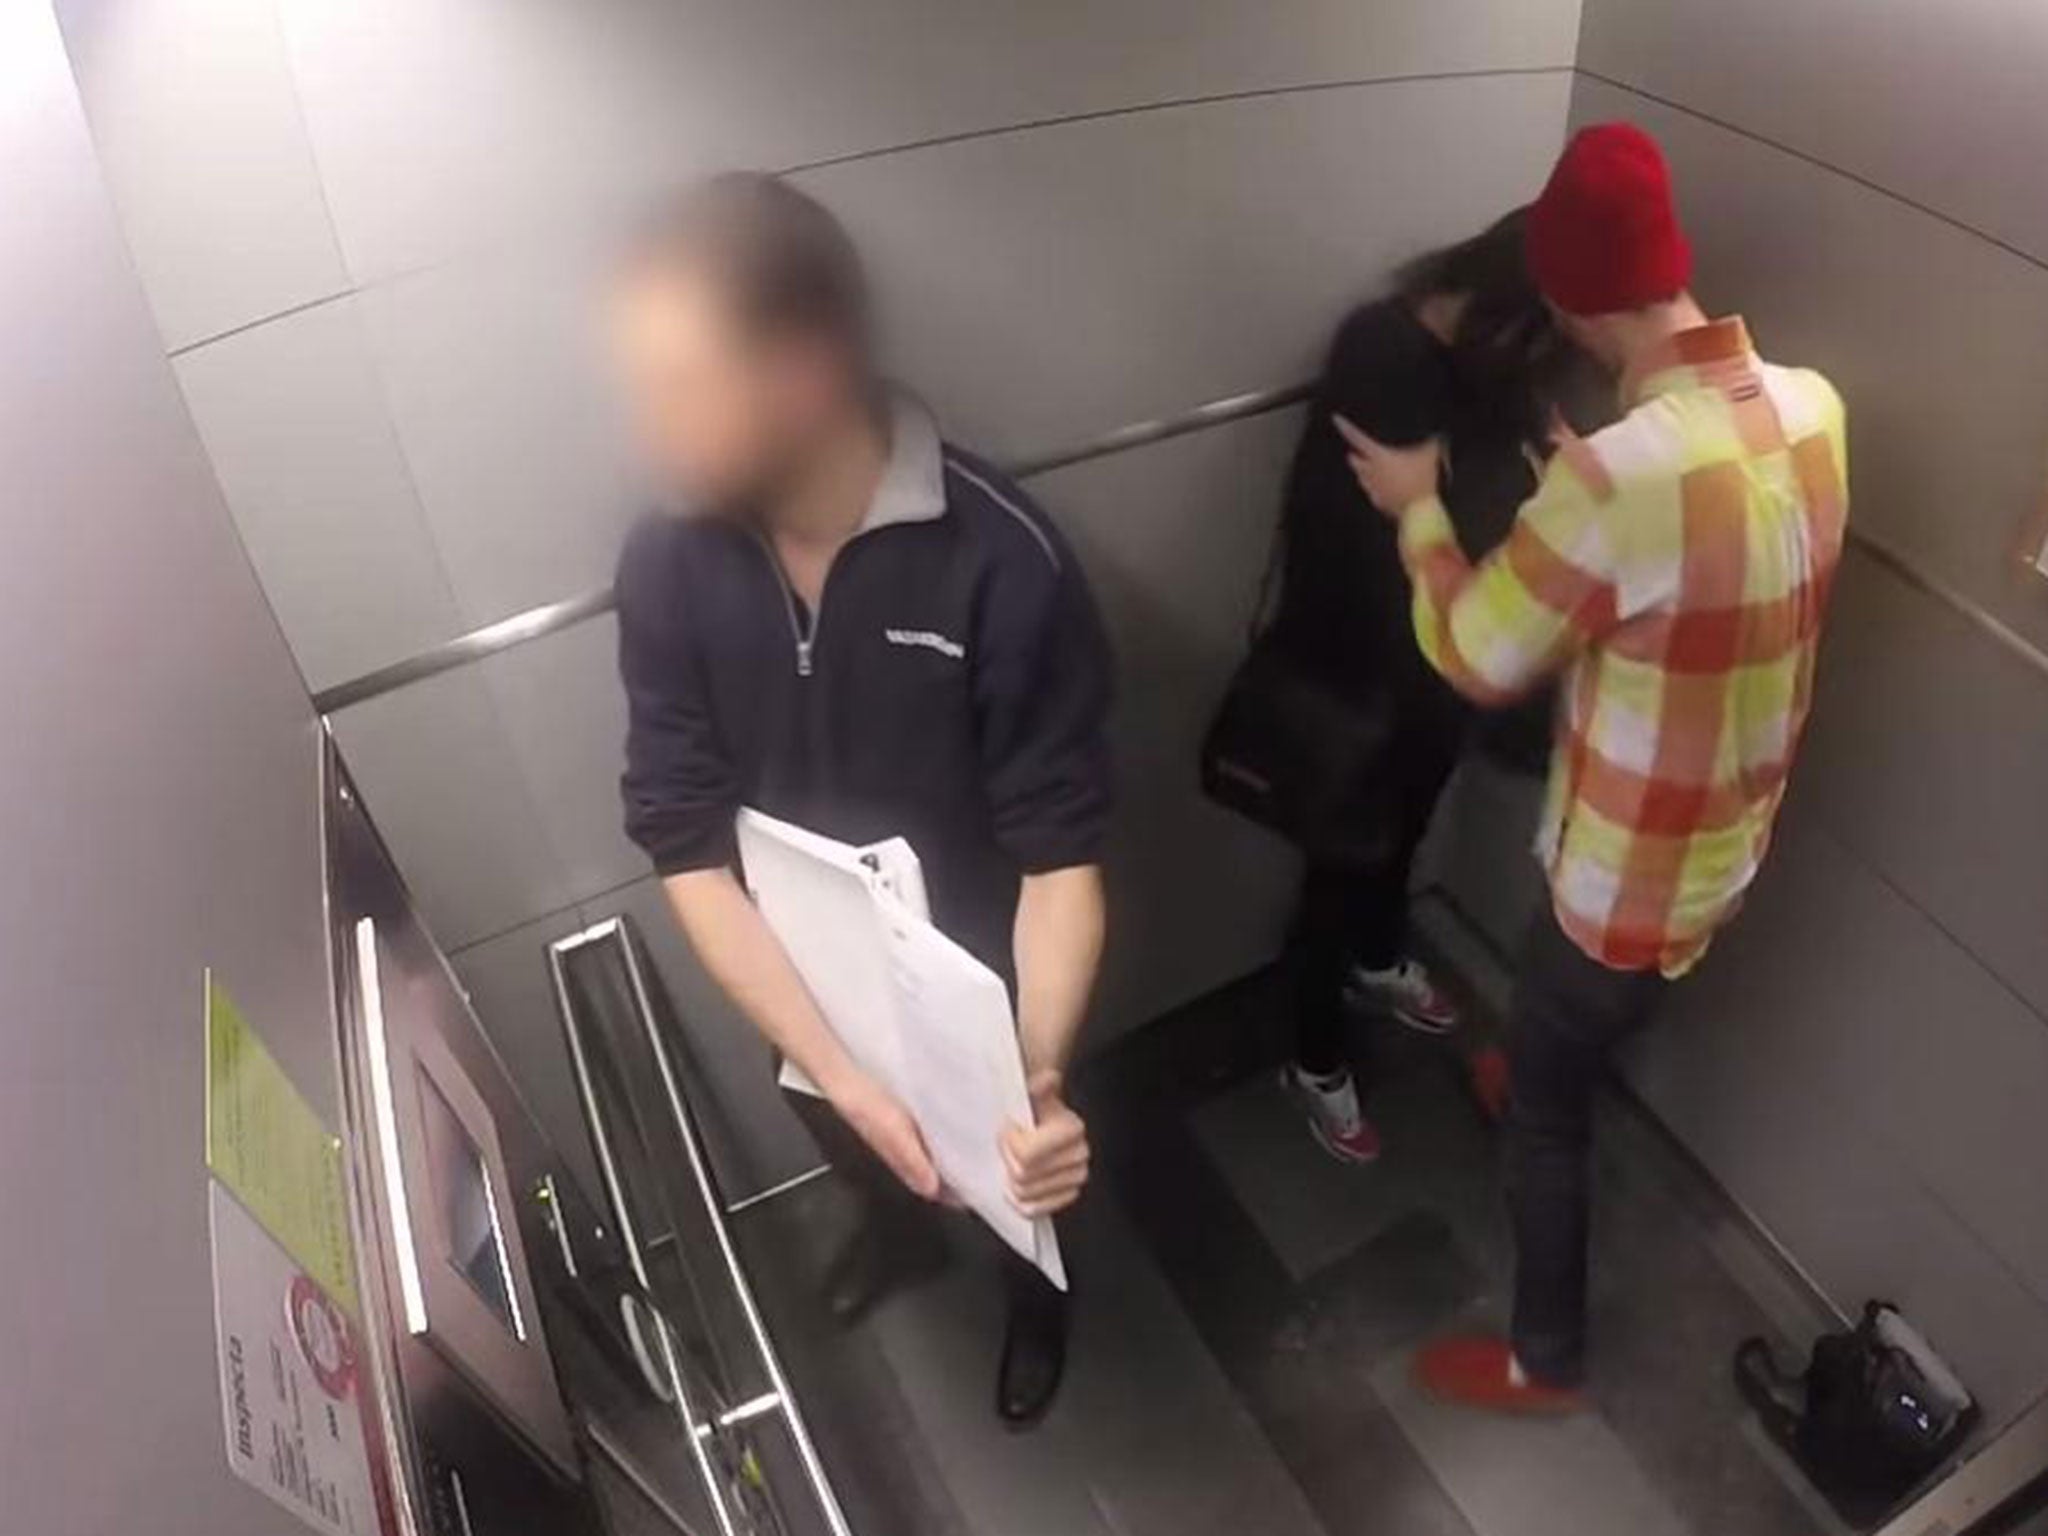 Two couples were filmed in a confrontation in the lift